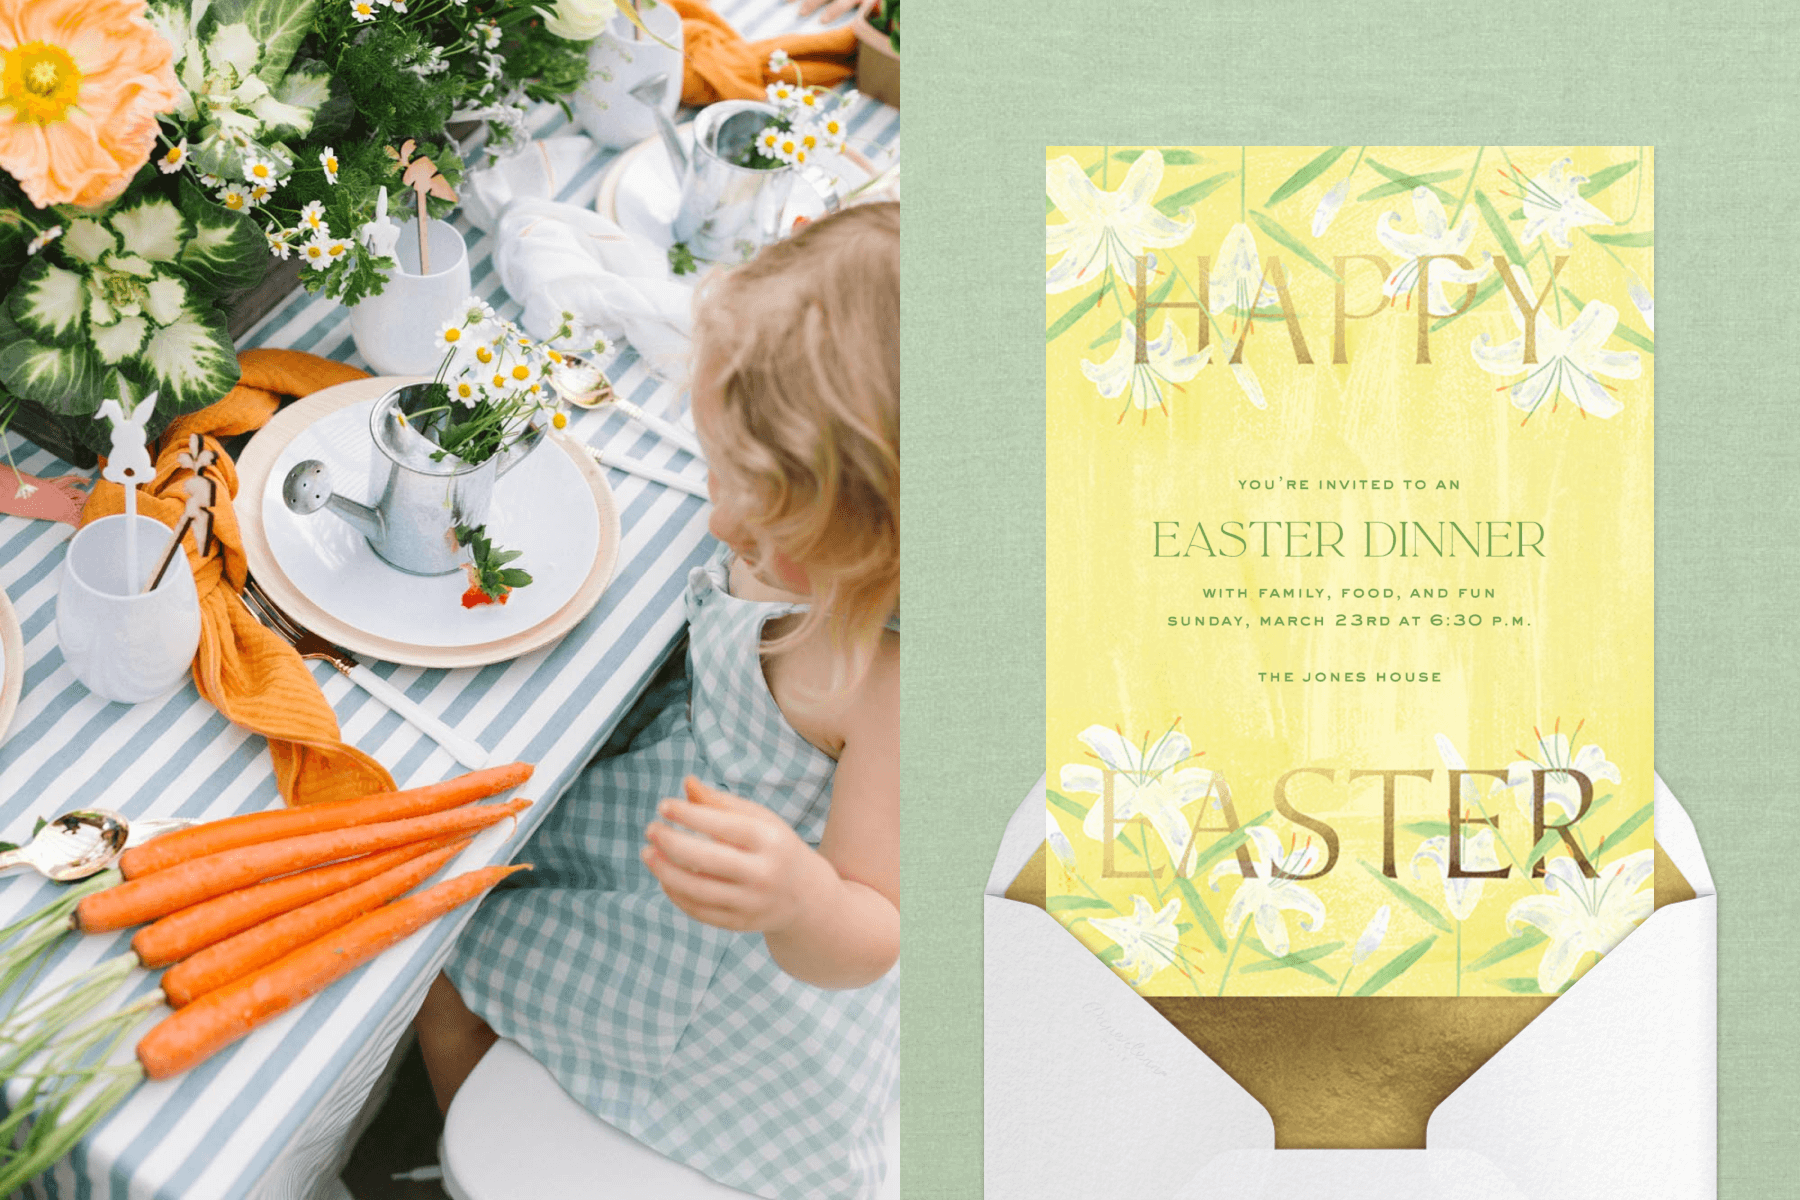 11 party ideas for Easter that will have the whole family hopping